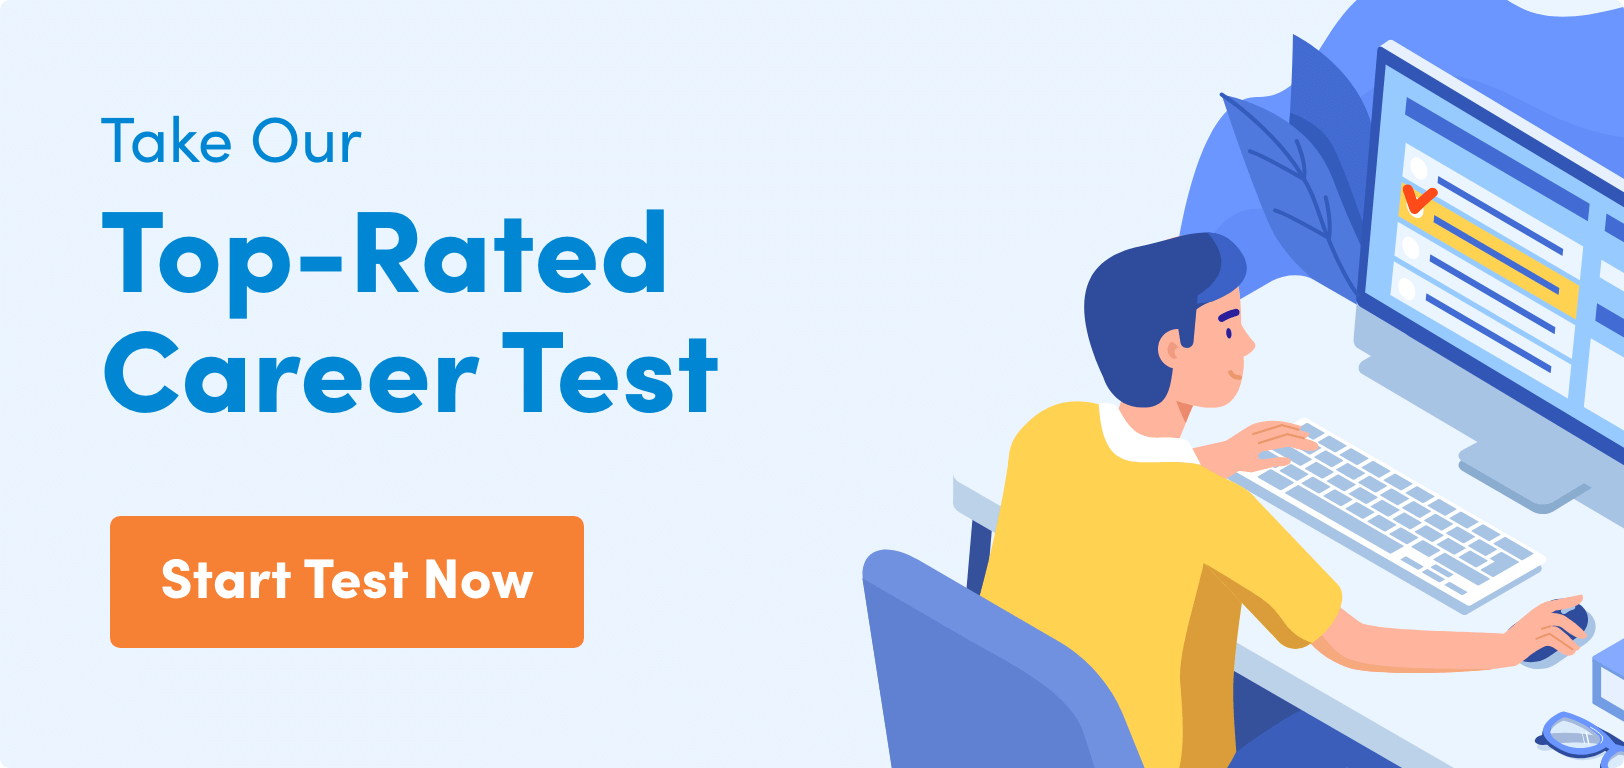 Click Here To Take Our Top-Rated Career Test